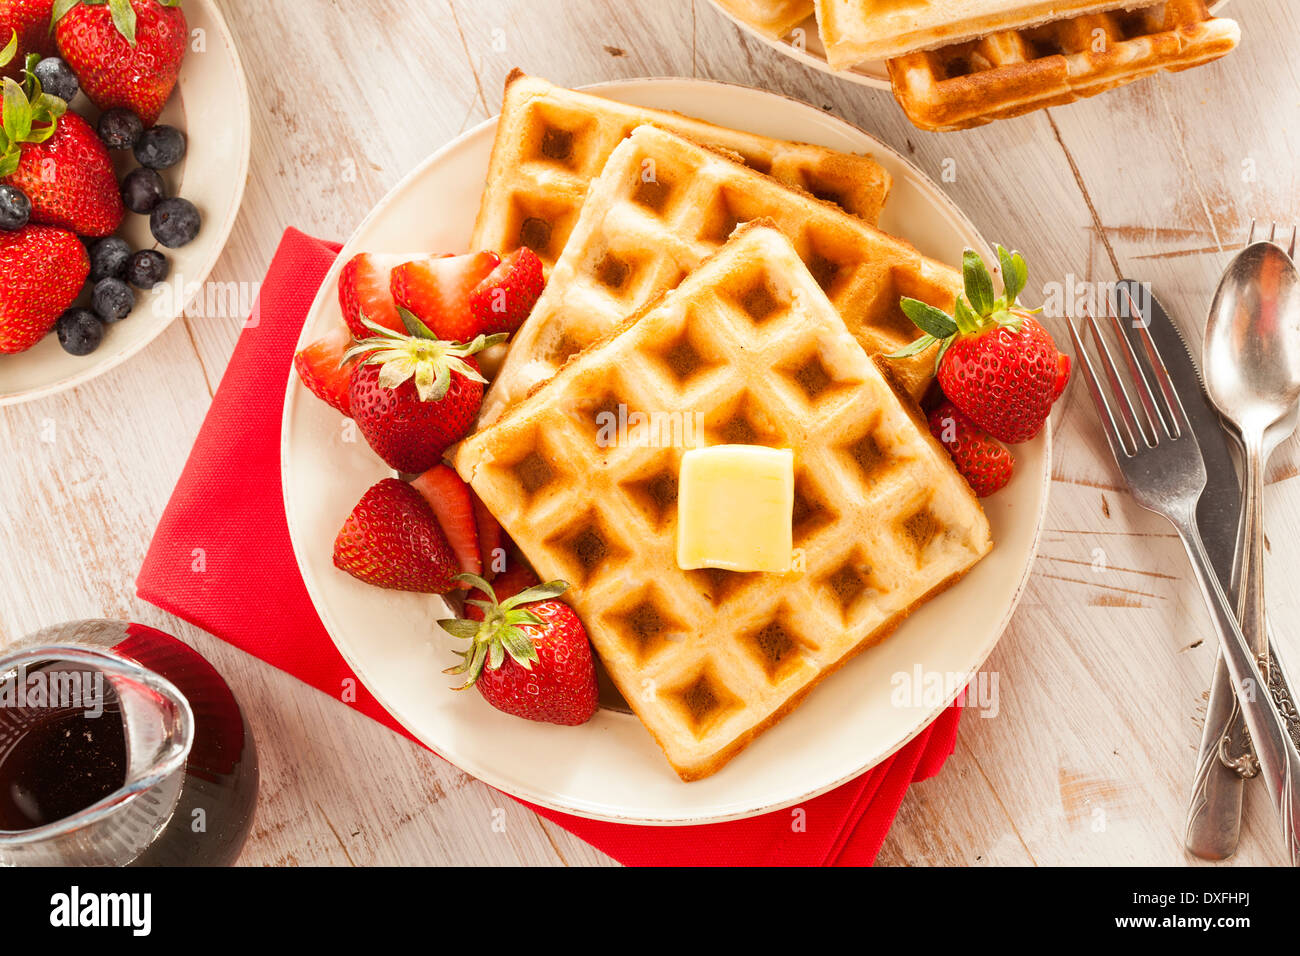 Homemade Belgian Waffles with Strawberries and Maple Syrup Stock Photo